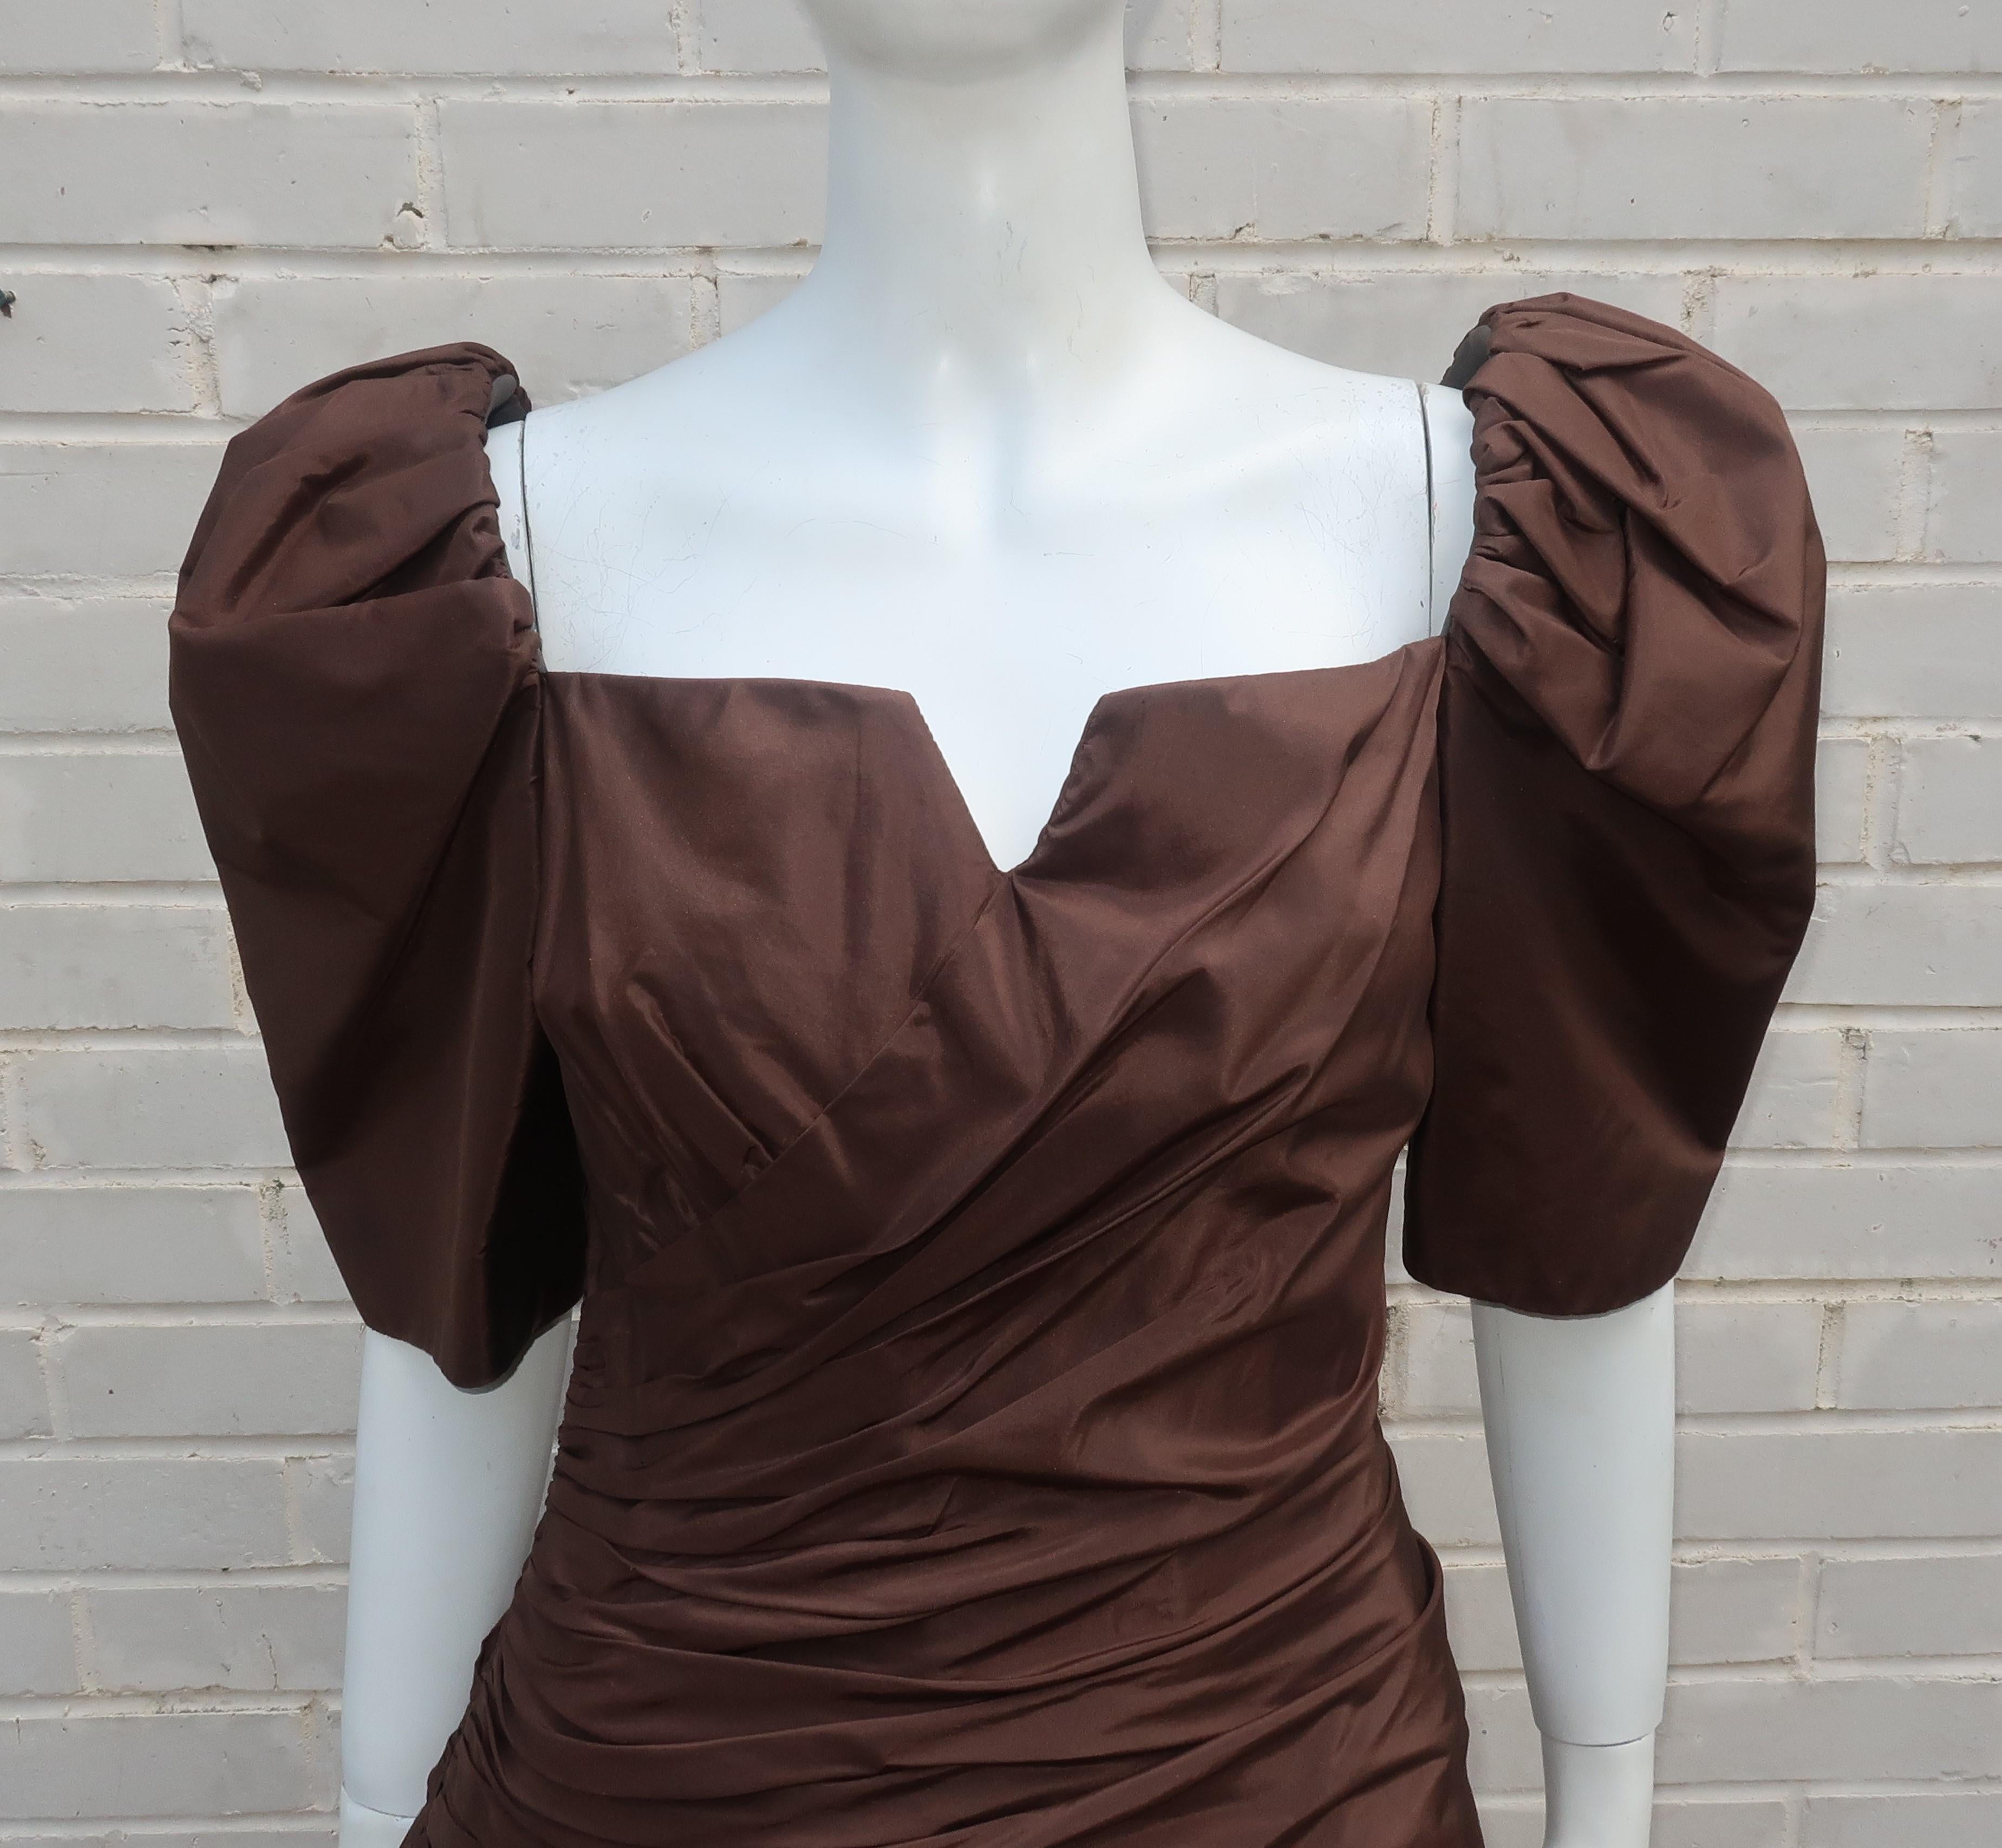 Gorgeous Arnold Scaasi brown silk taffeta cocktail dress with ruched torso and a dramatic neckline accented by puff sleeves.  The dress zips at the back side panel and is constructed with boning throughout the torso and at the top of the sleeves. 